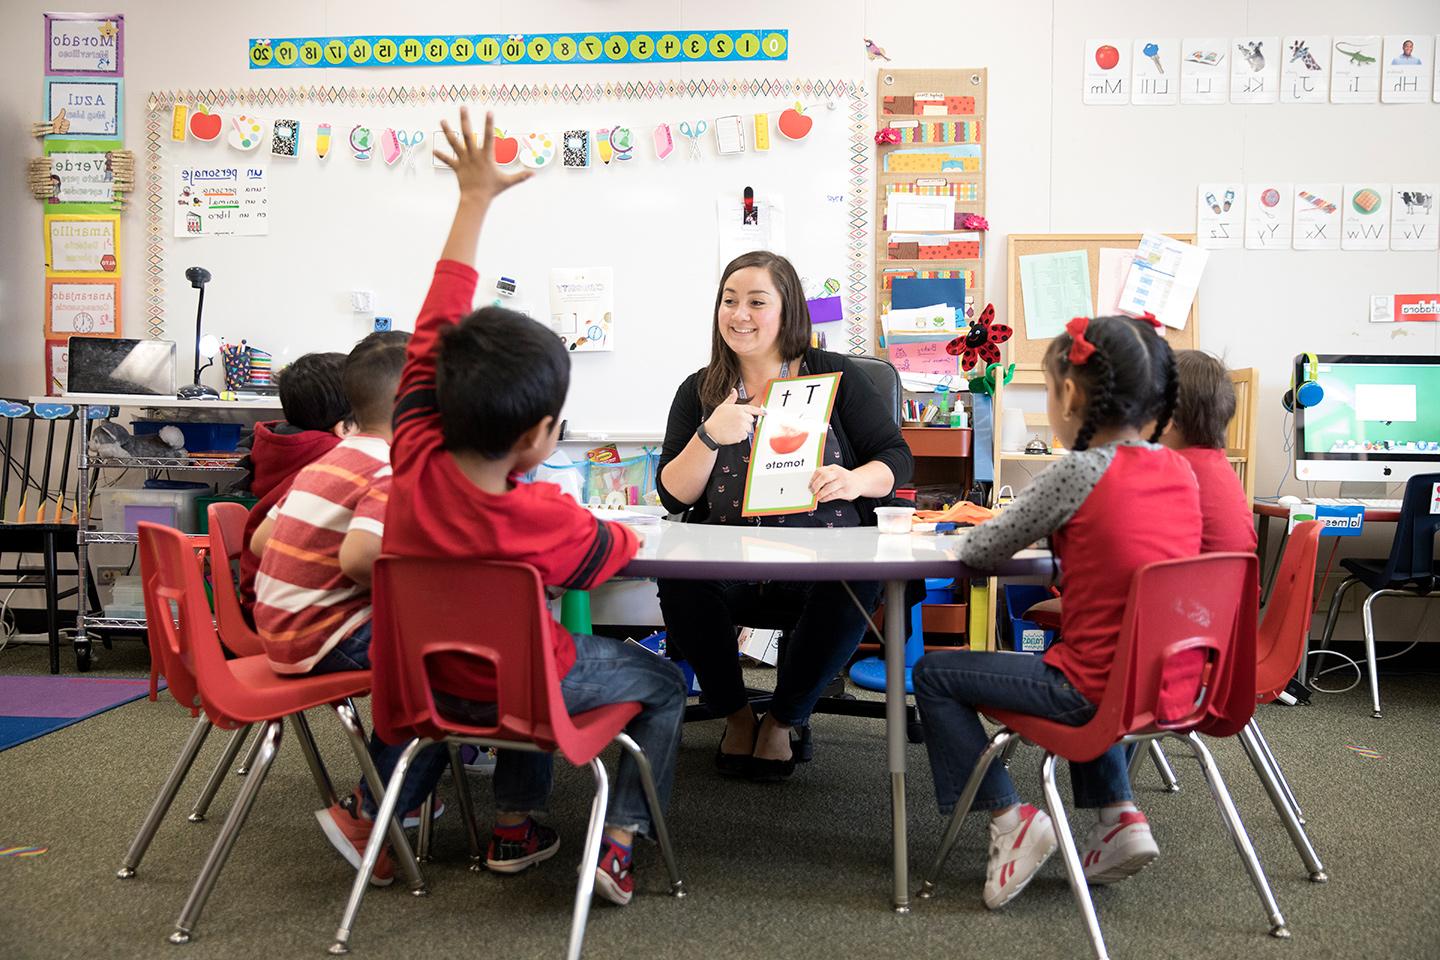 Elementary teacher Jacqueline Lujan sitting at a table in a classroom with children